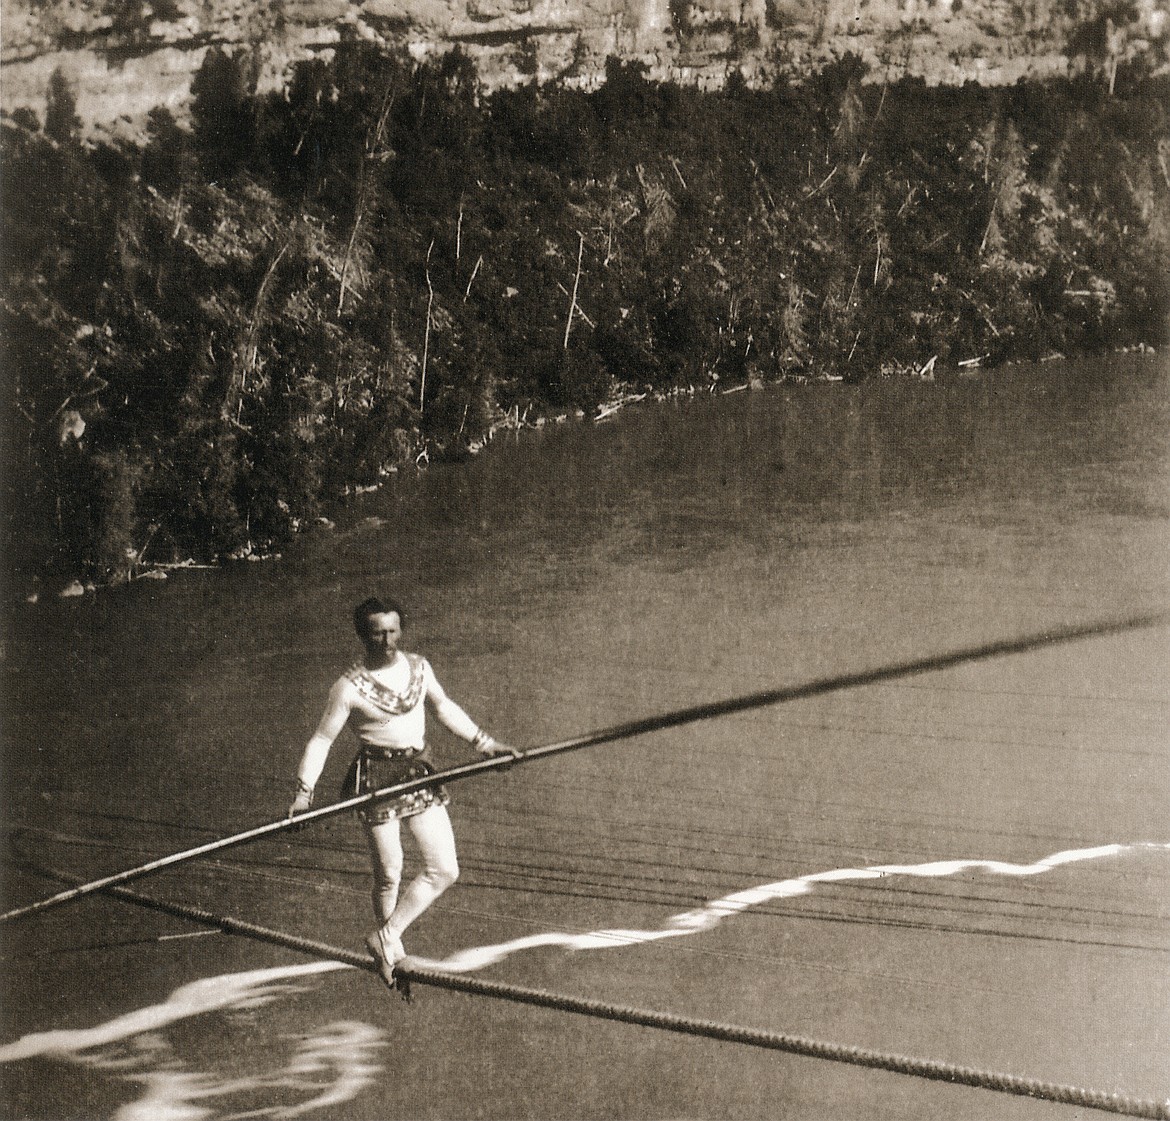 French tightrope walker Charles Blondin (1824-1897) was first to walk the cable across the Niagara Gorge.